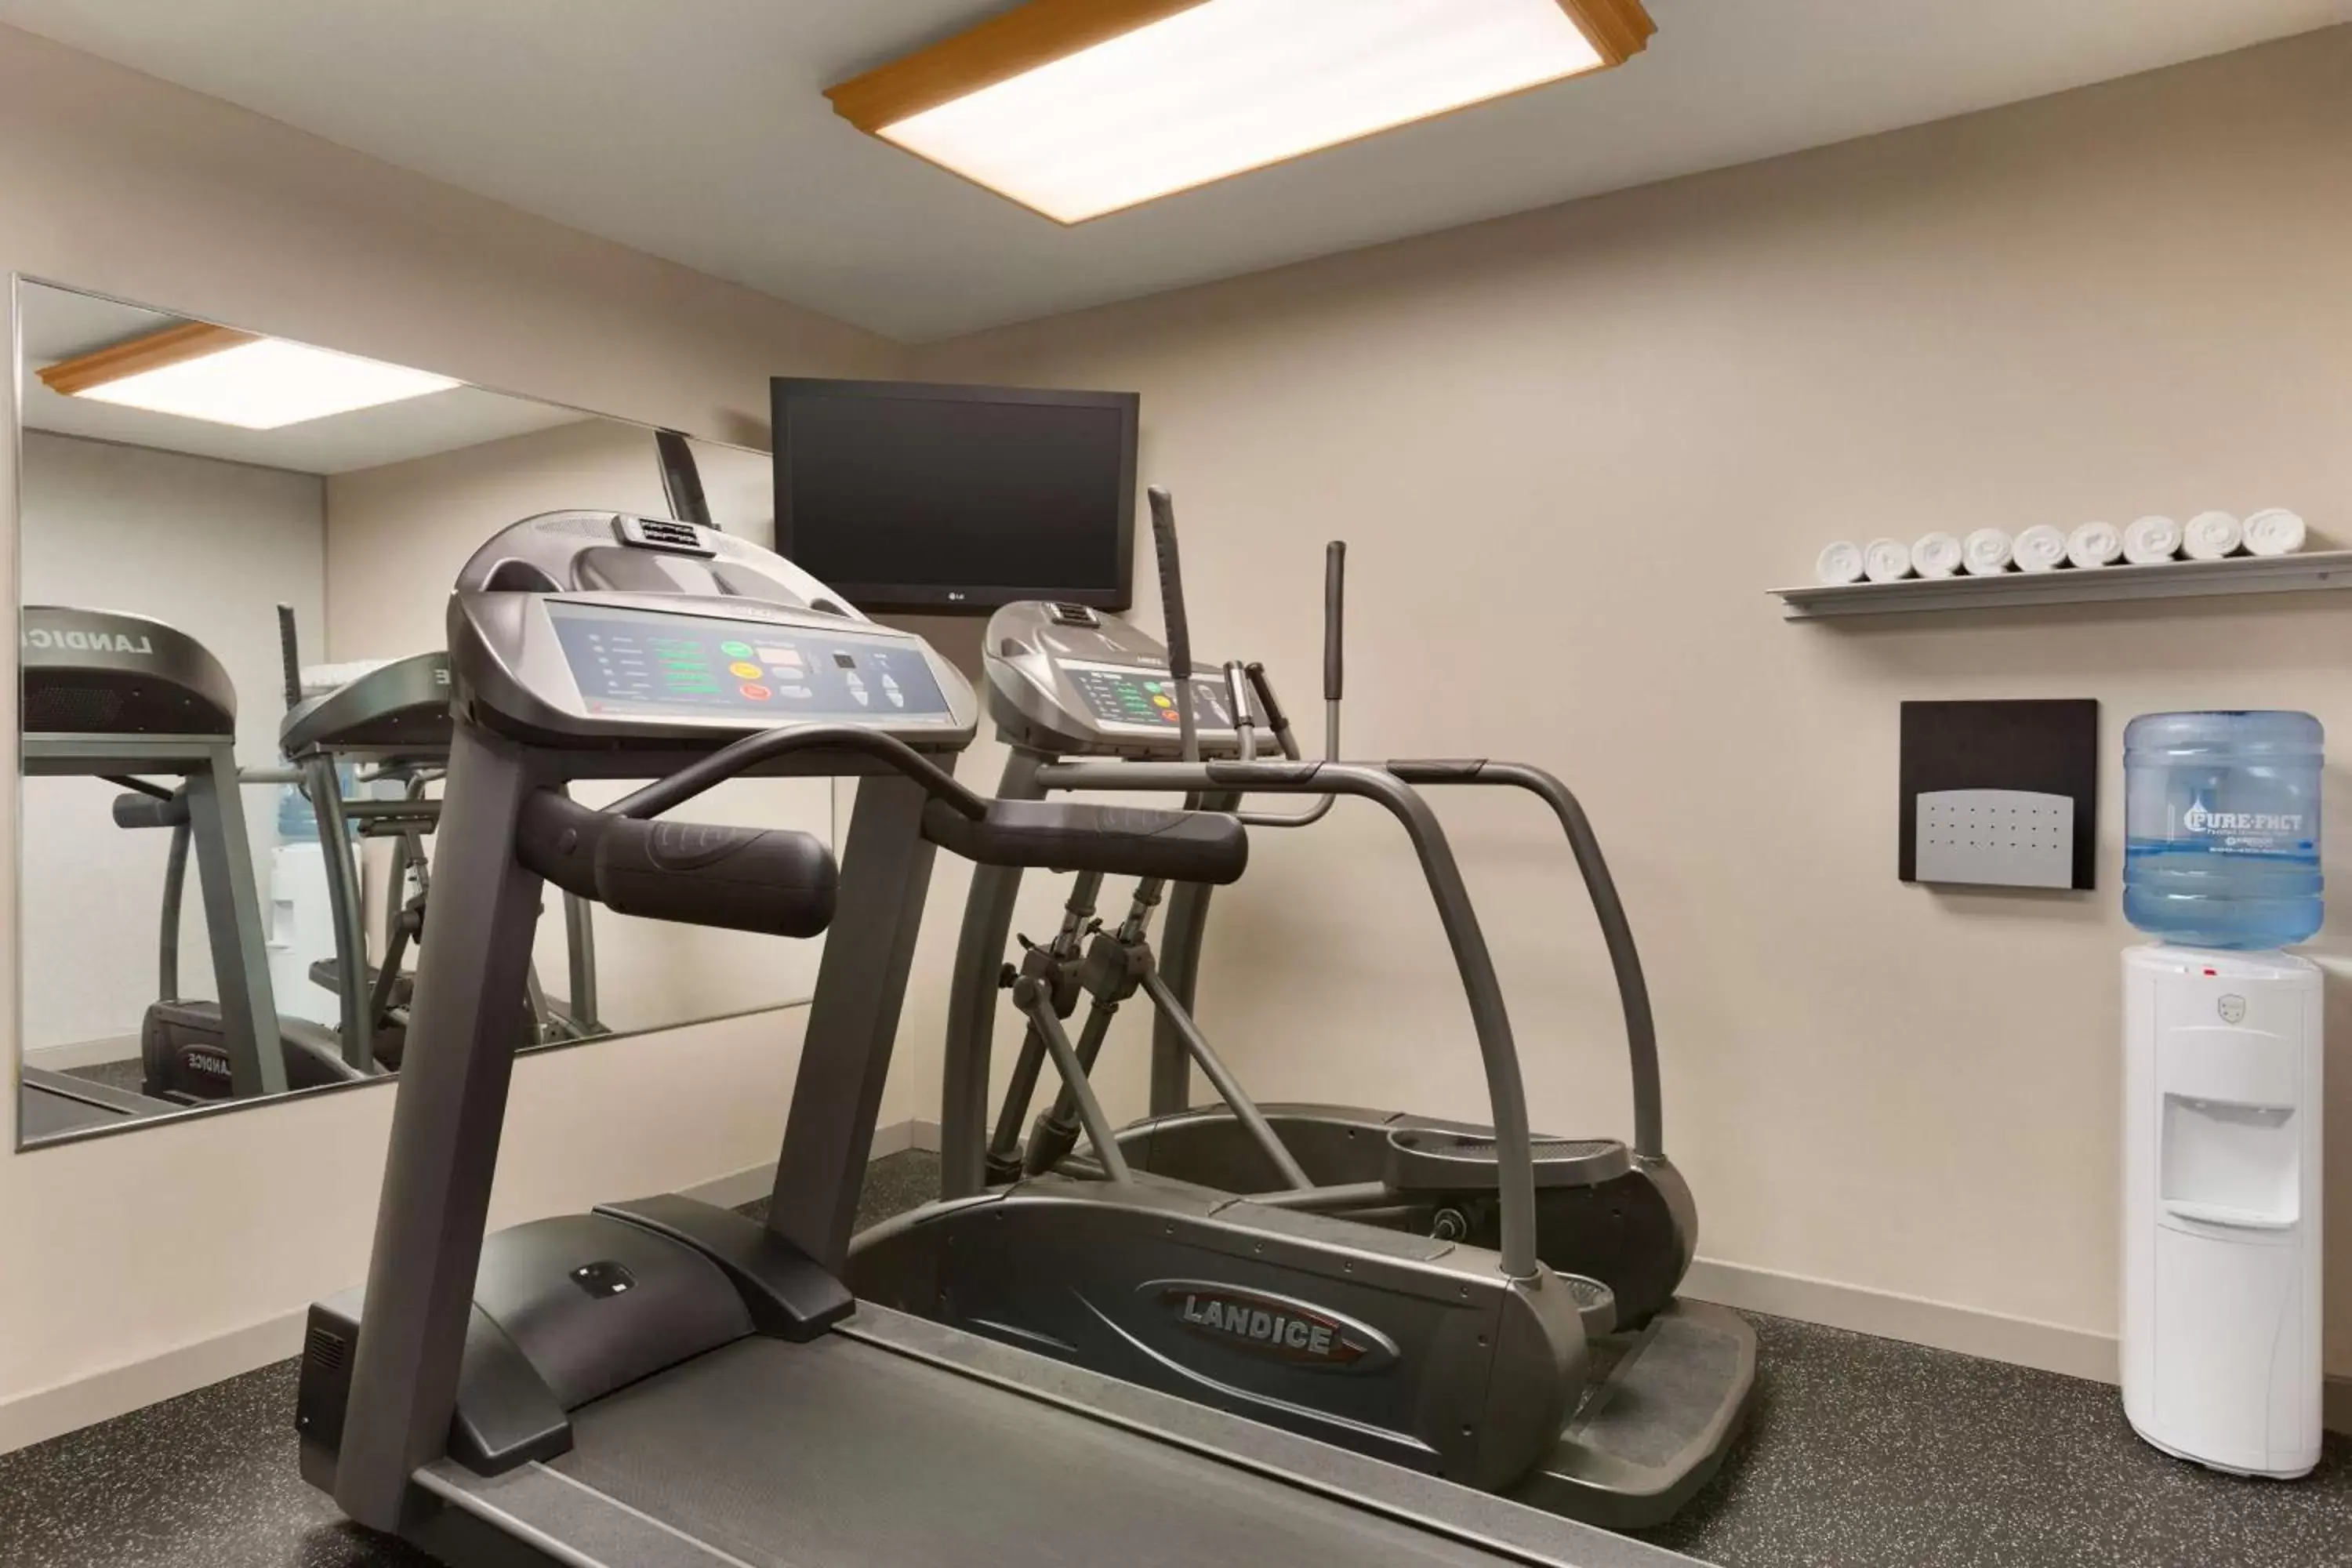 Activities, Fitness Center/Facilities in Country Inn & Suites by Radisson, Mishawaka, IN